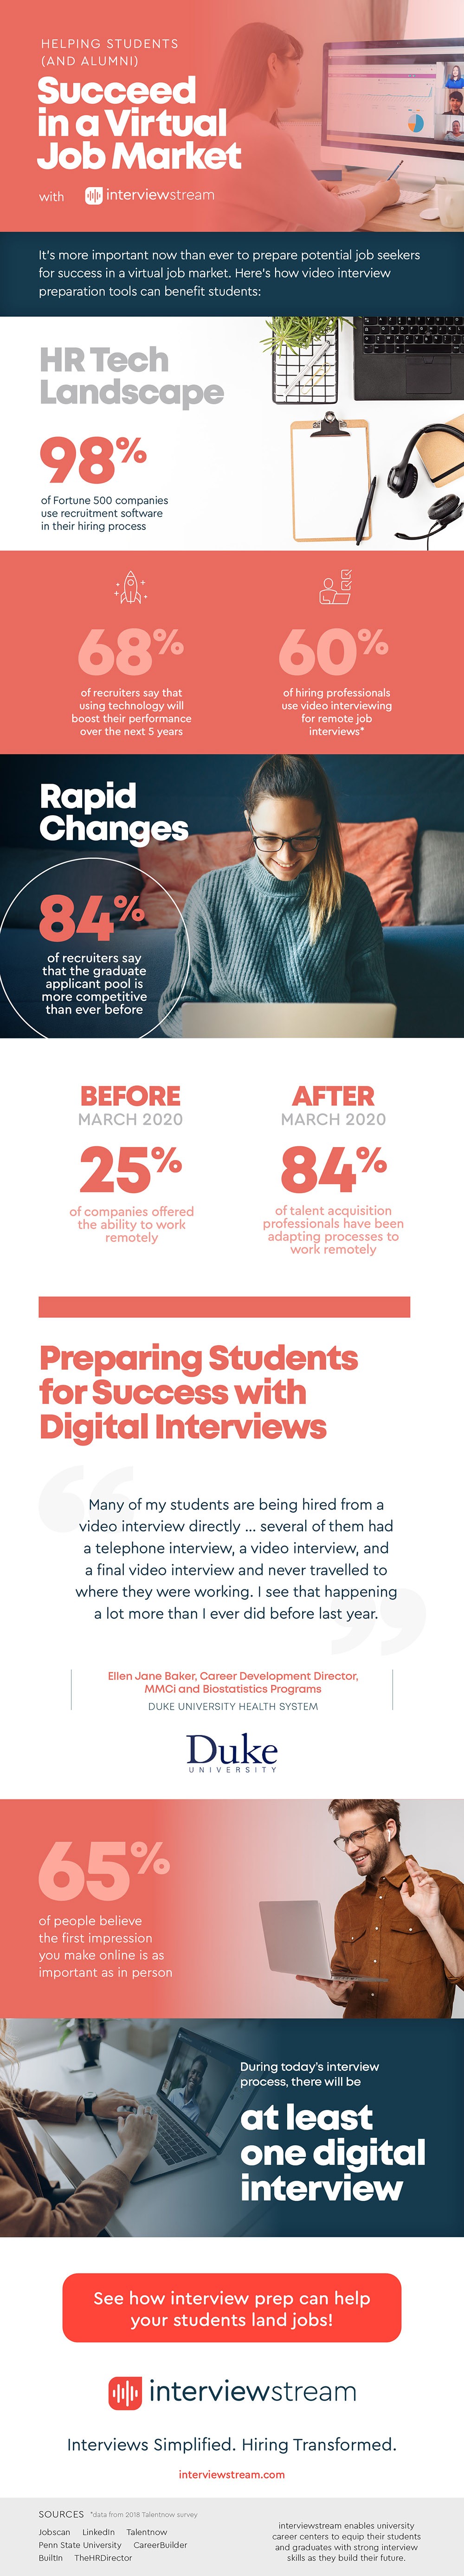 Infographic showcasing the importance of preparing students and alumni for the virtual job market.